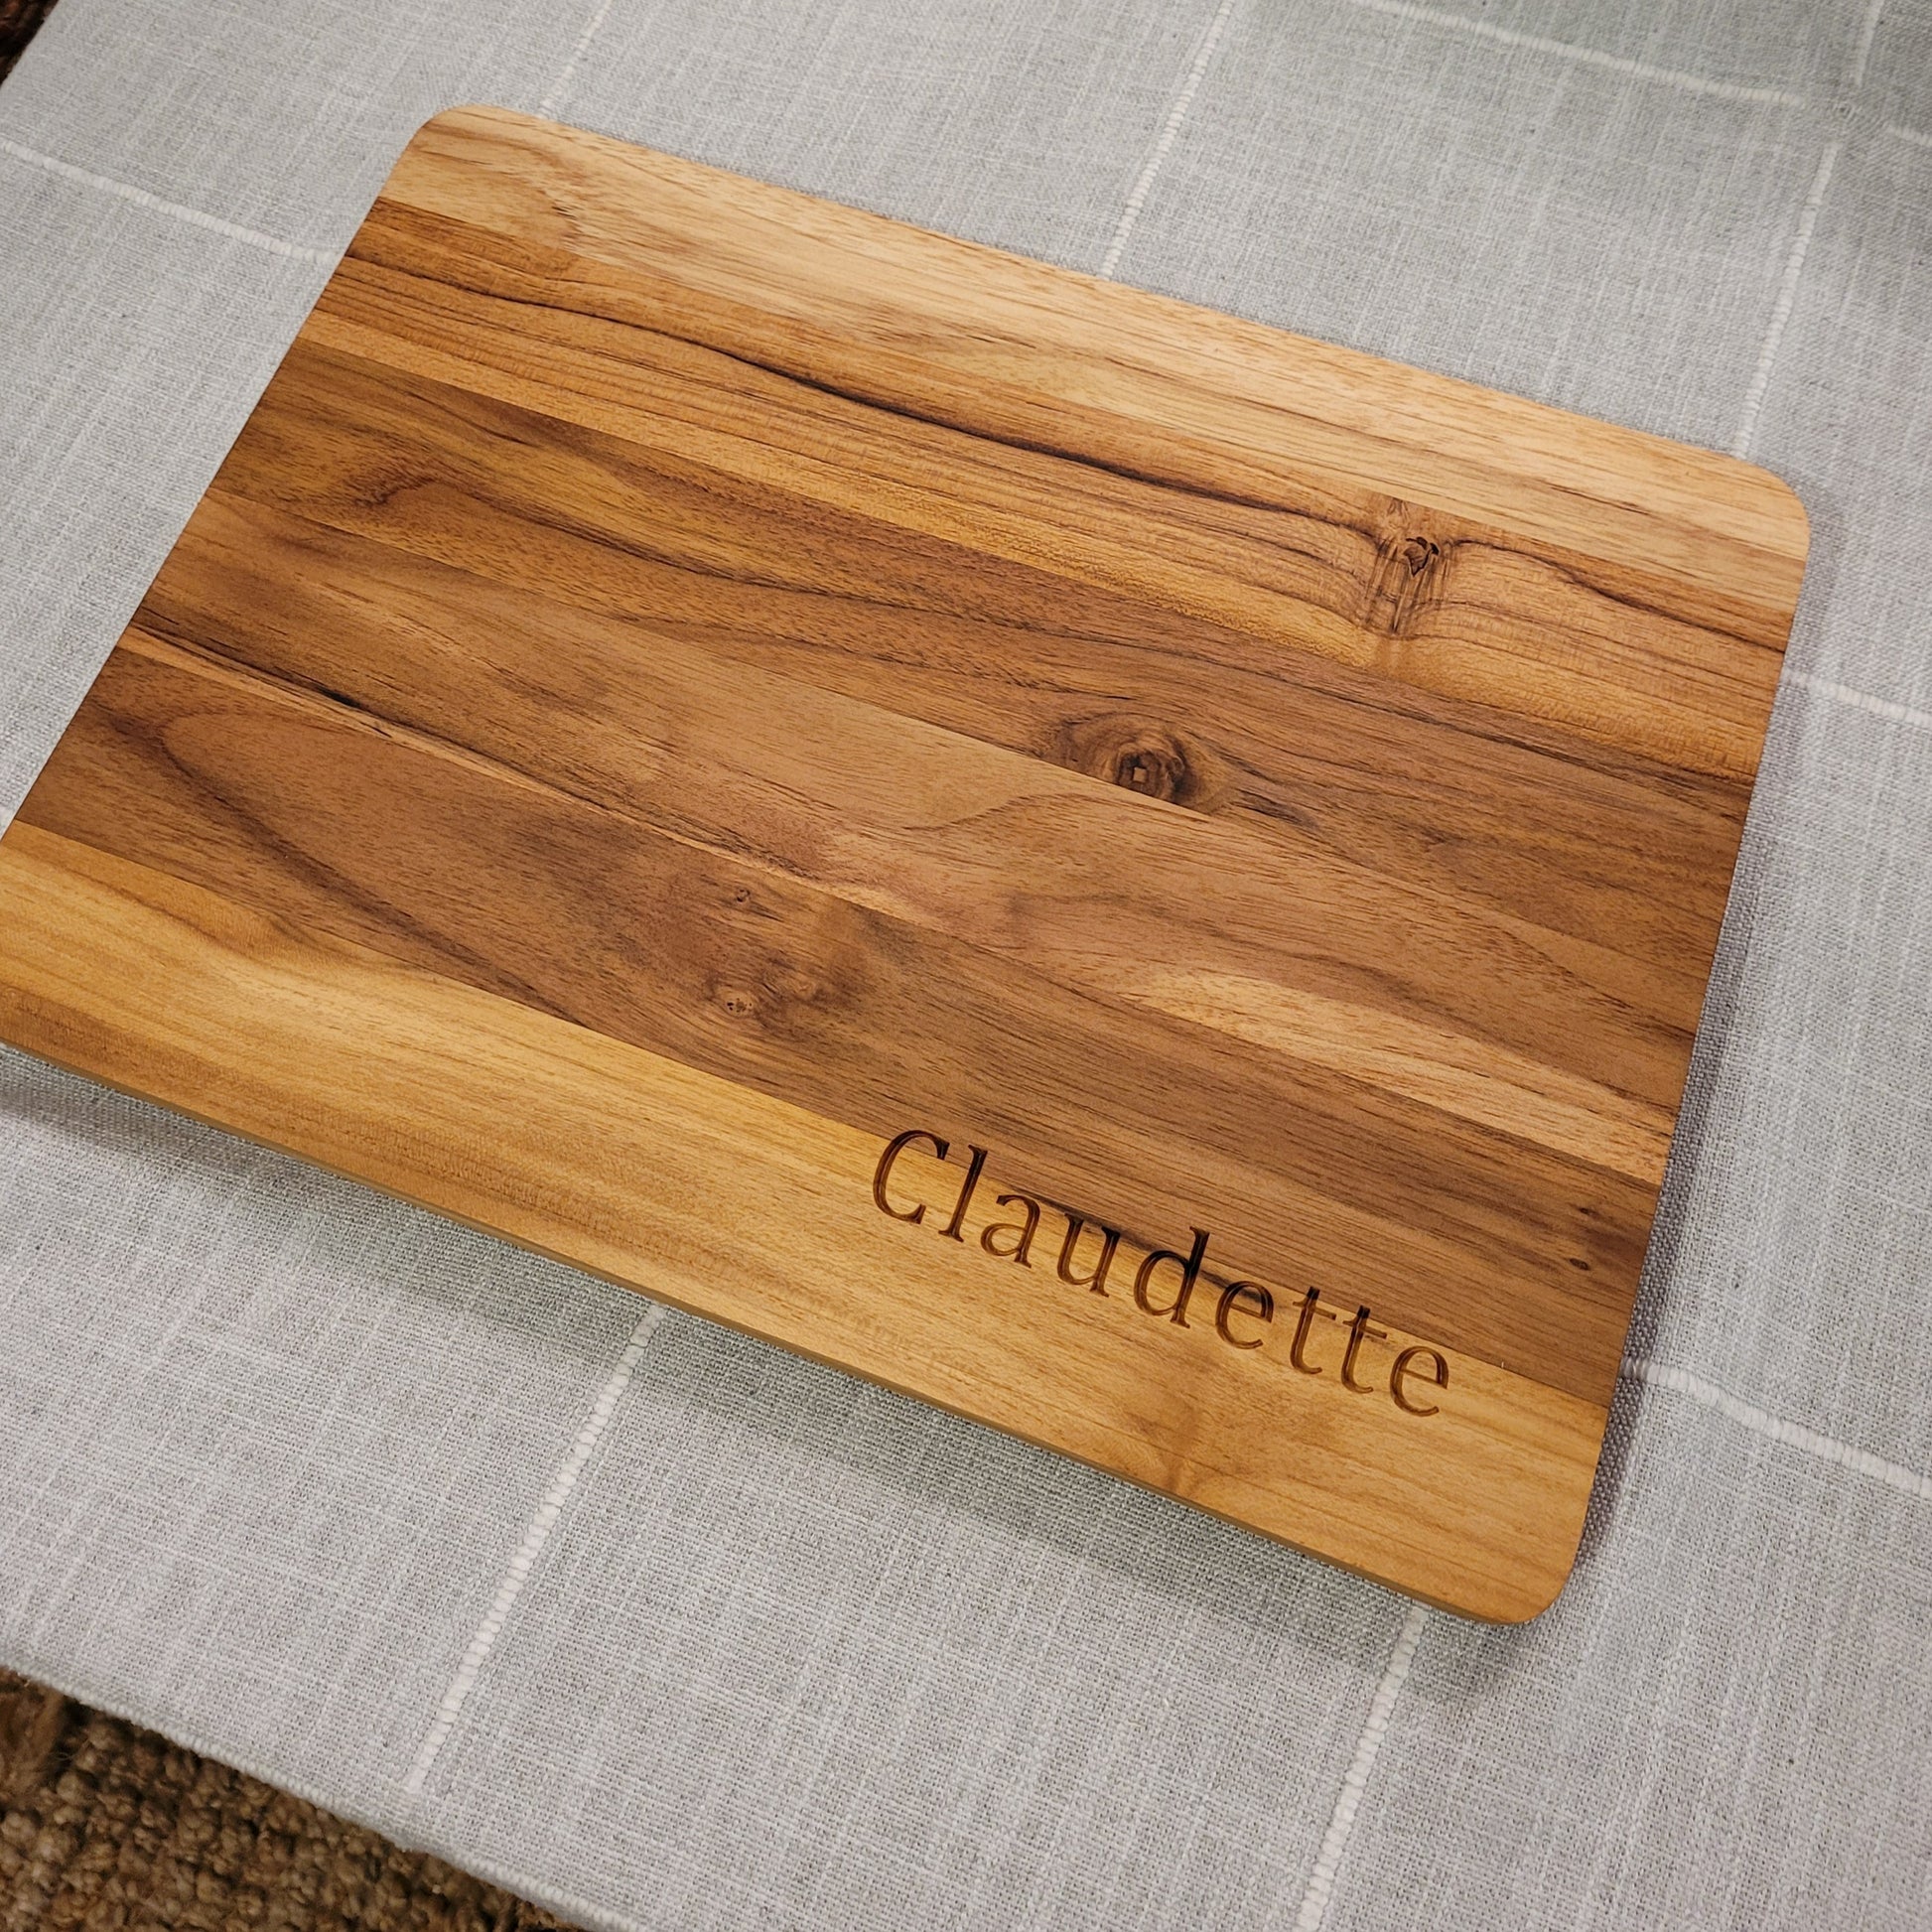 teakwood cutting board engraved with a name